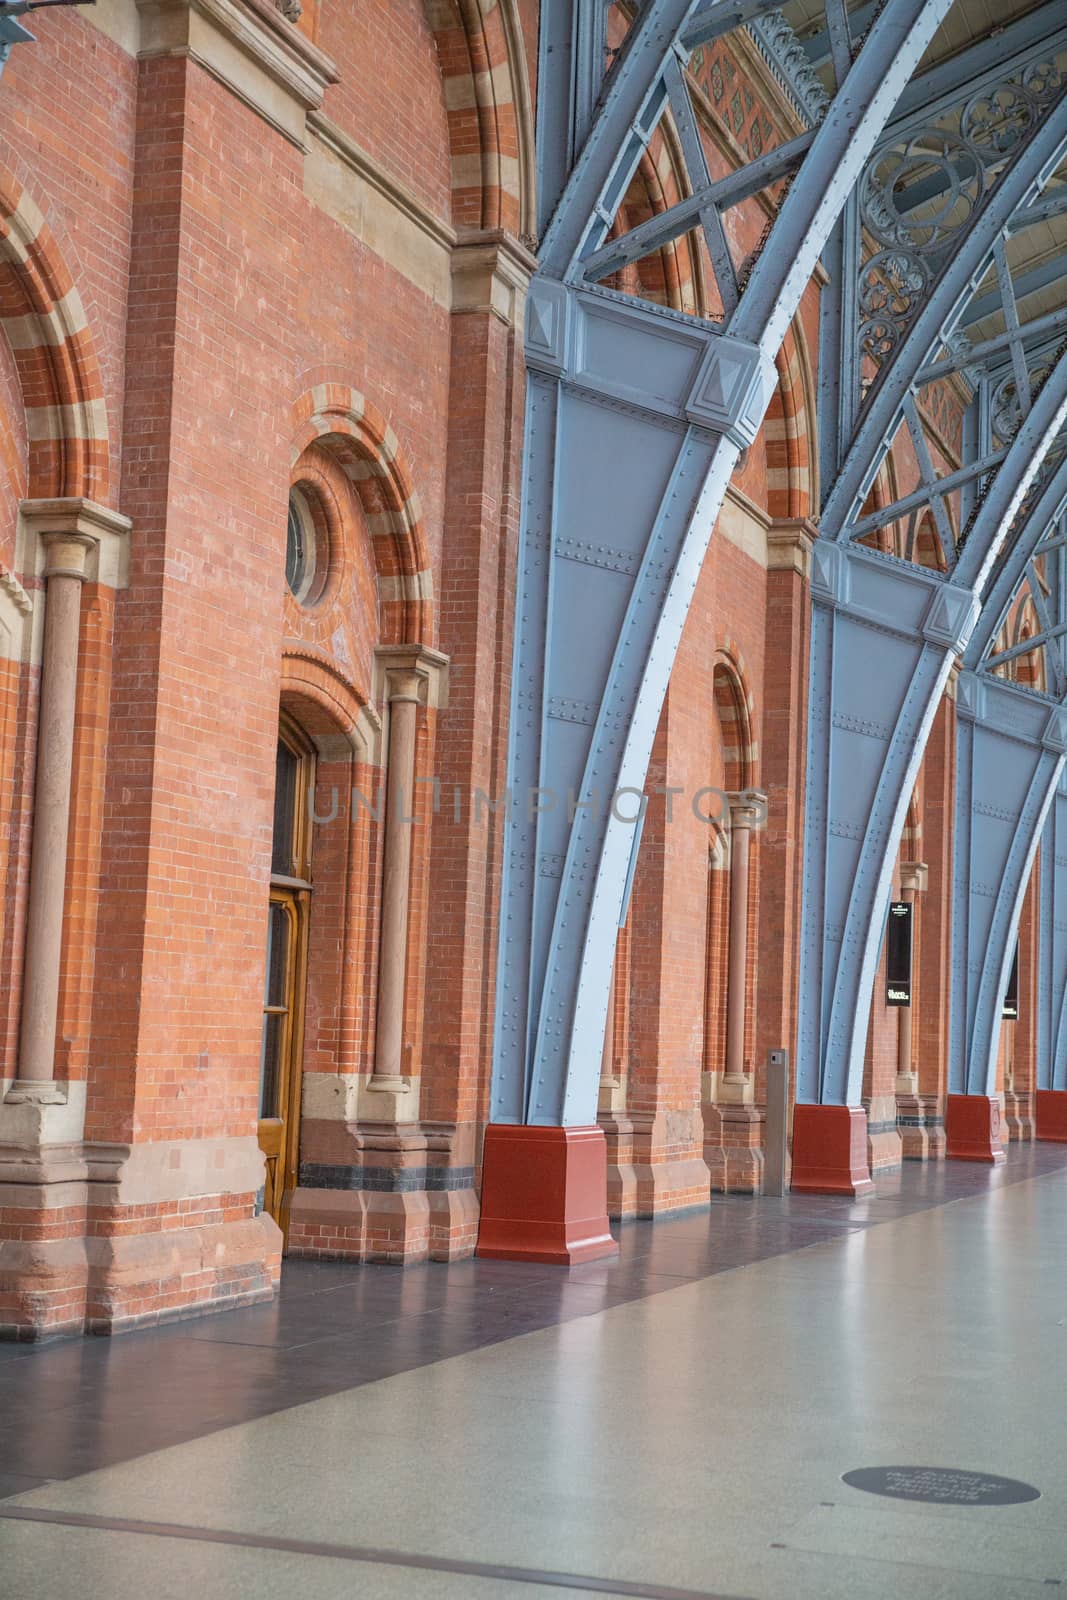 Portrait View of the Walls and Metal Arches of the St Pancras railway station by Kanelbulle